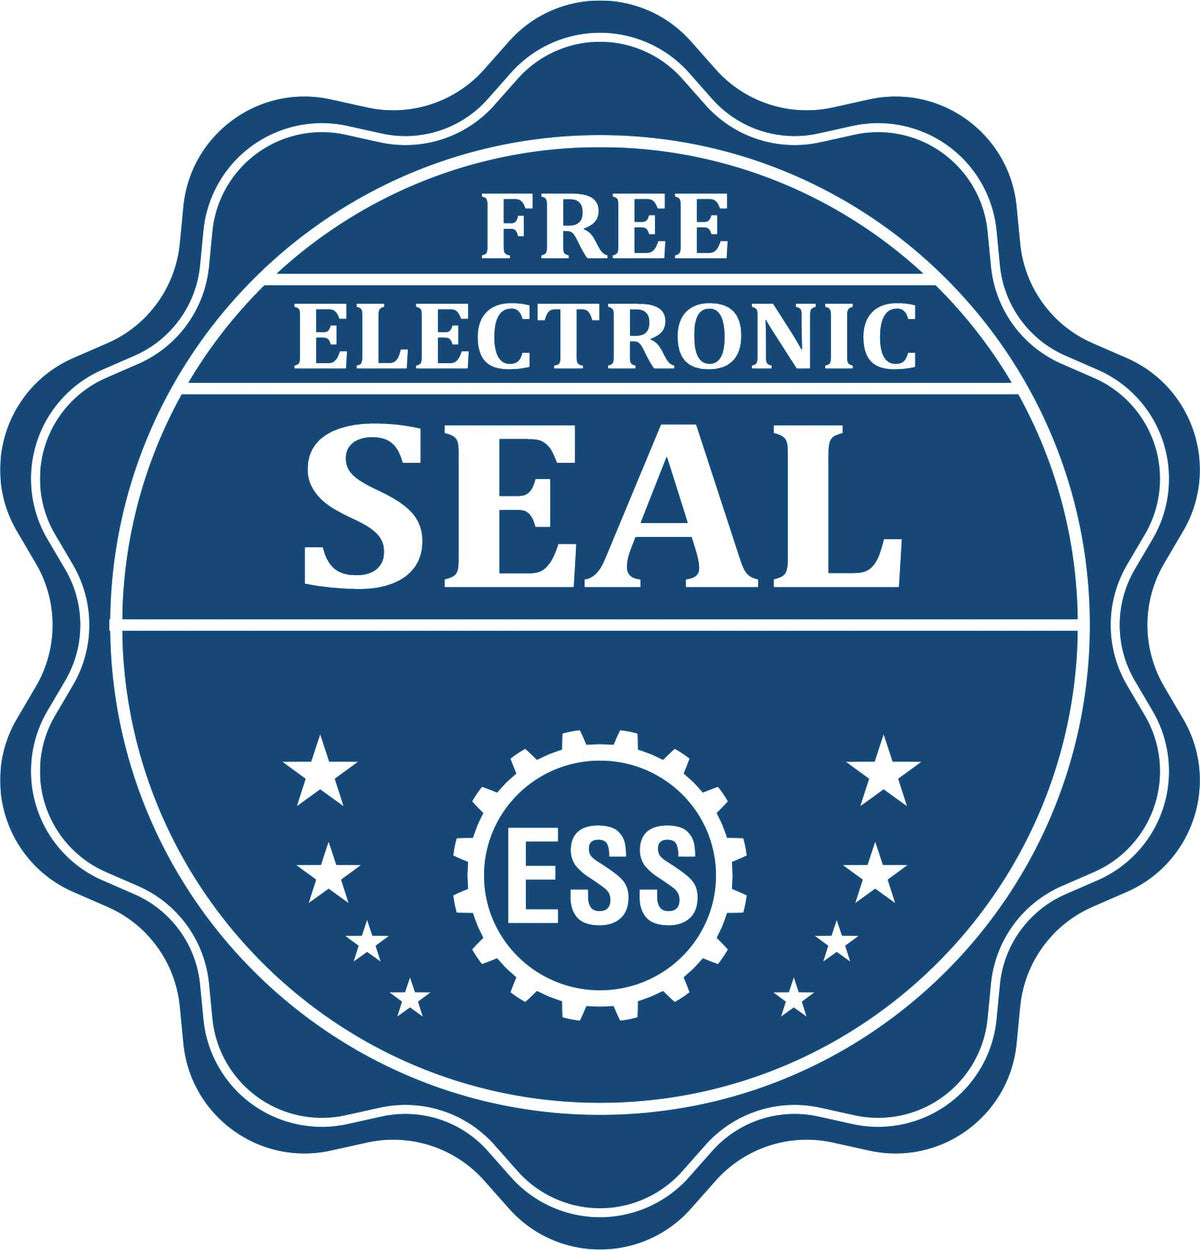 A badge showing a free electronic seal for the Gift Florida Engineer Seal with stars and the ESS gear on the emblem.